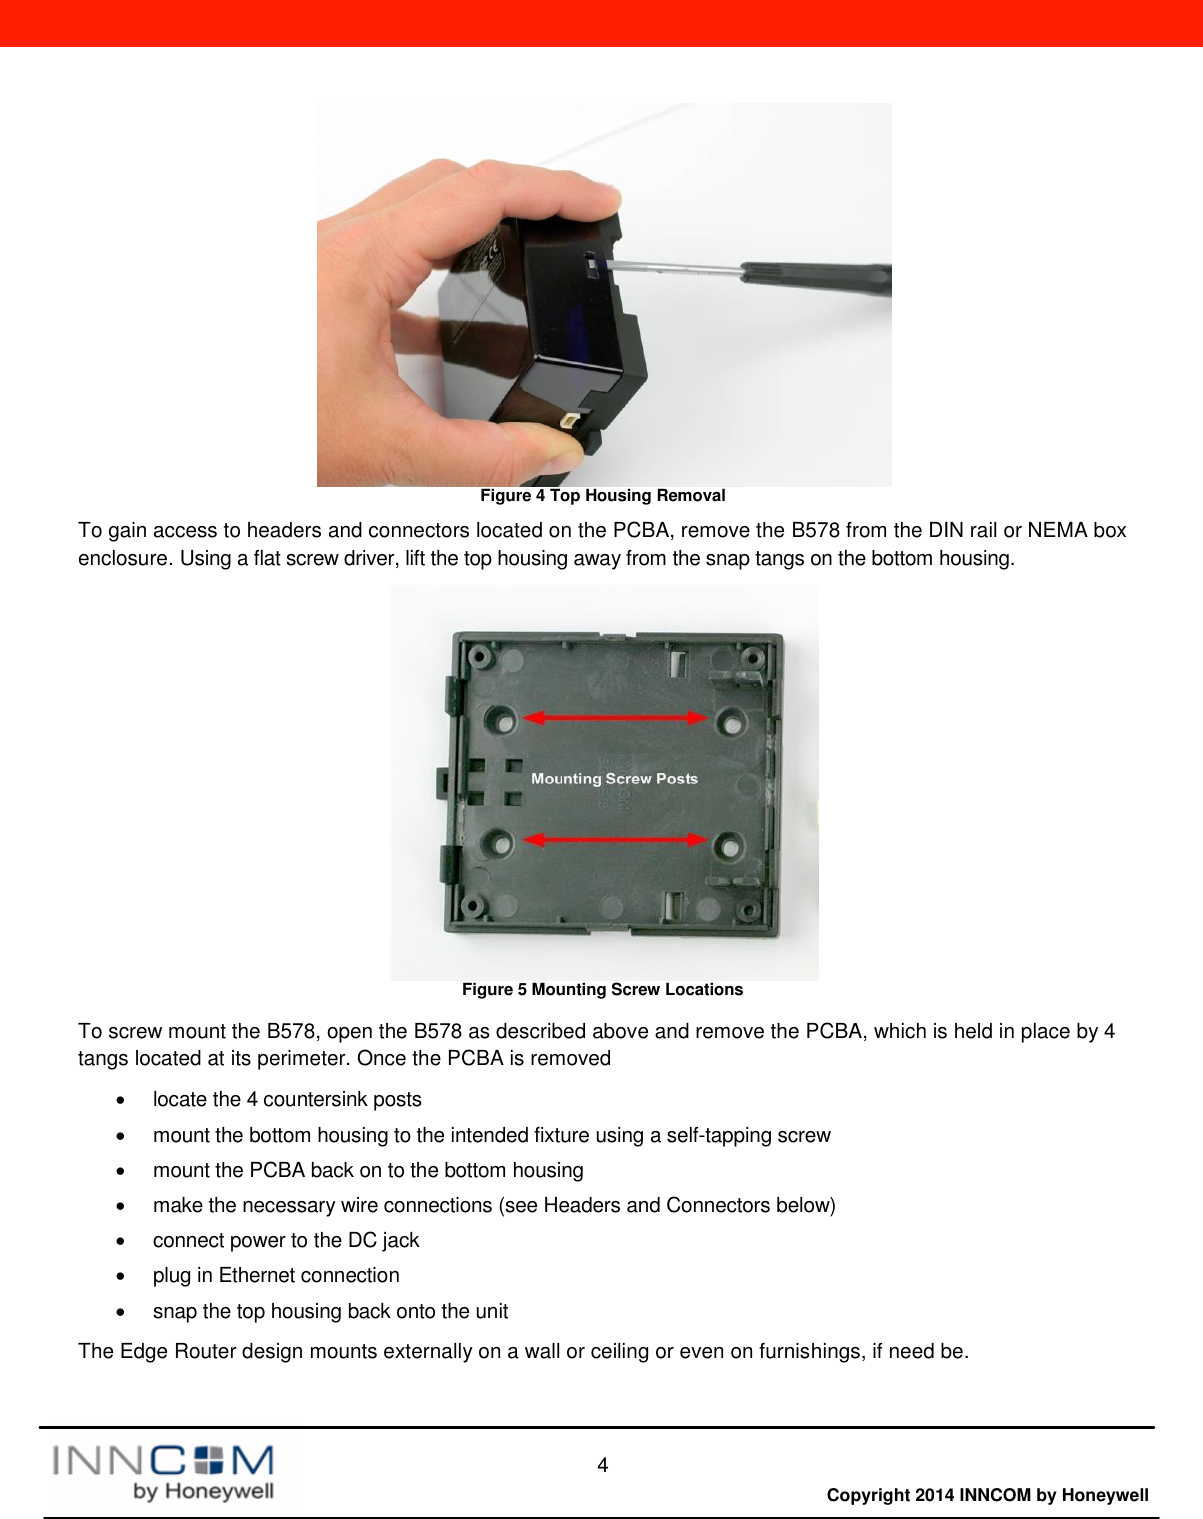  4  Copyright 2014 INNCOM by Honeywell  Figure 4 Top Housing Removal To gain access to headers and connectors located on the PCBA, remove the B578 from the DIN rail or NEMA box enclosure. Using a flat screw driver, lift the top housing away from the snap tangs on the bottom housing.  Figure 5 Mounting Screw Locations  To screw mount the B578, open the B578 as described above and remove the PCBA, which is held in place by 4 tangs located at its perimeter. Once the PCBA is removed   locate the 4 countersink posts   mount the bottom housing to the intended fixture using a self-tapping screw   mount the PCBA back on to the bottom housing   make the necessary wire connections (see Headers and Connectors below)   connect power to the DC jack   plug in Ethernet connection   snap the top housing back onto the unit  The Edge Router design mounts externally on a wall or ceiling or even on furnishings, if need be.  